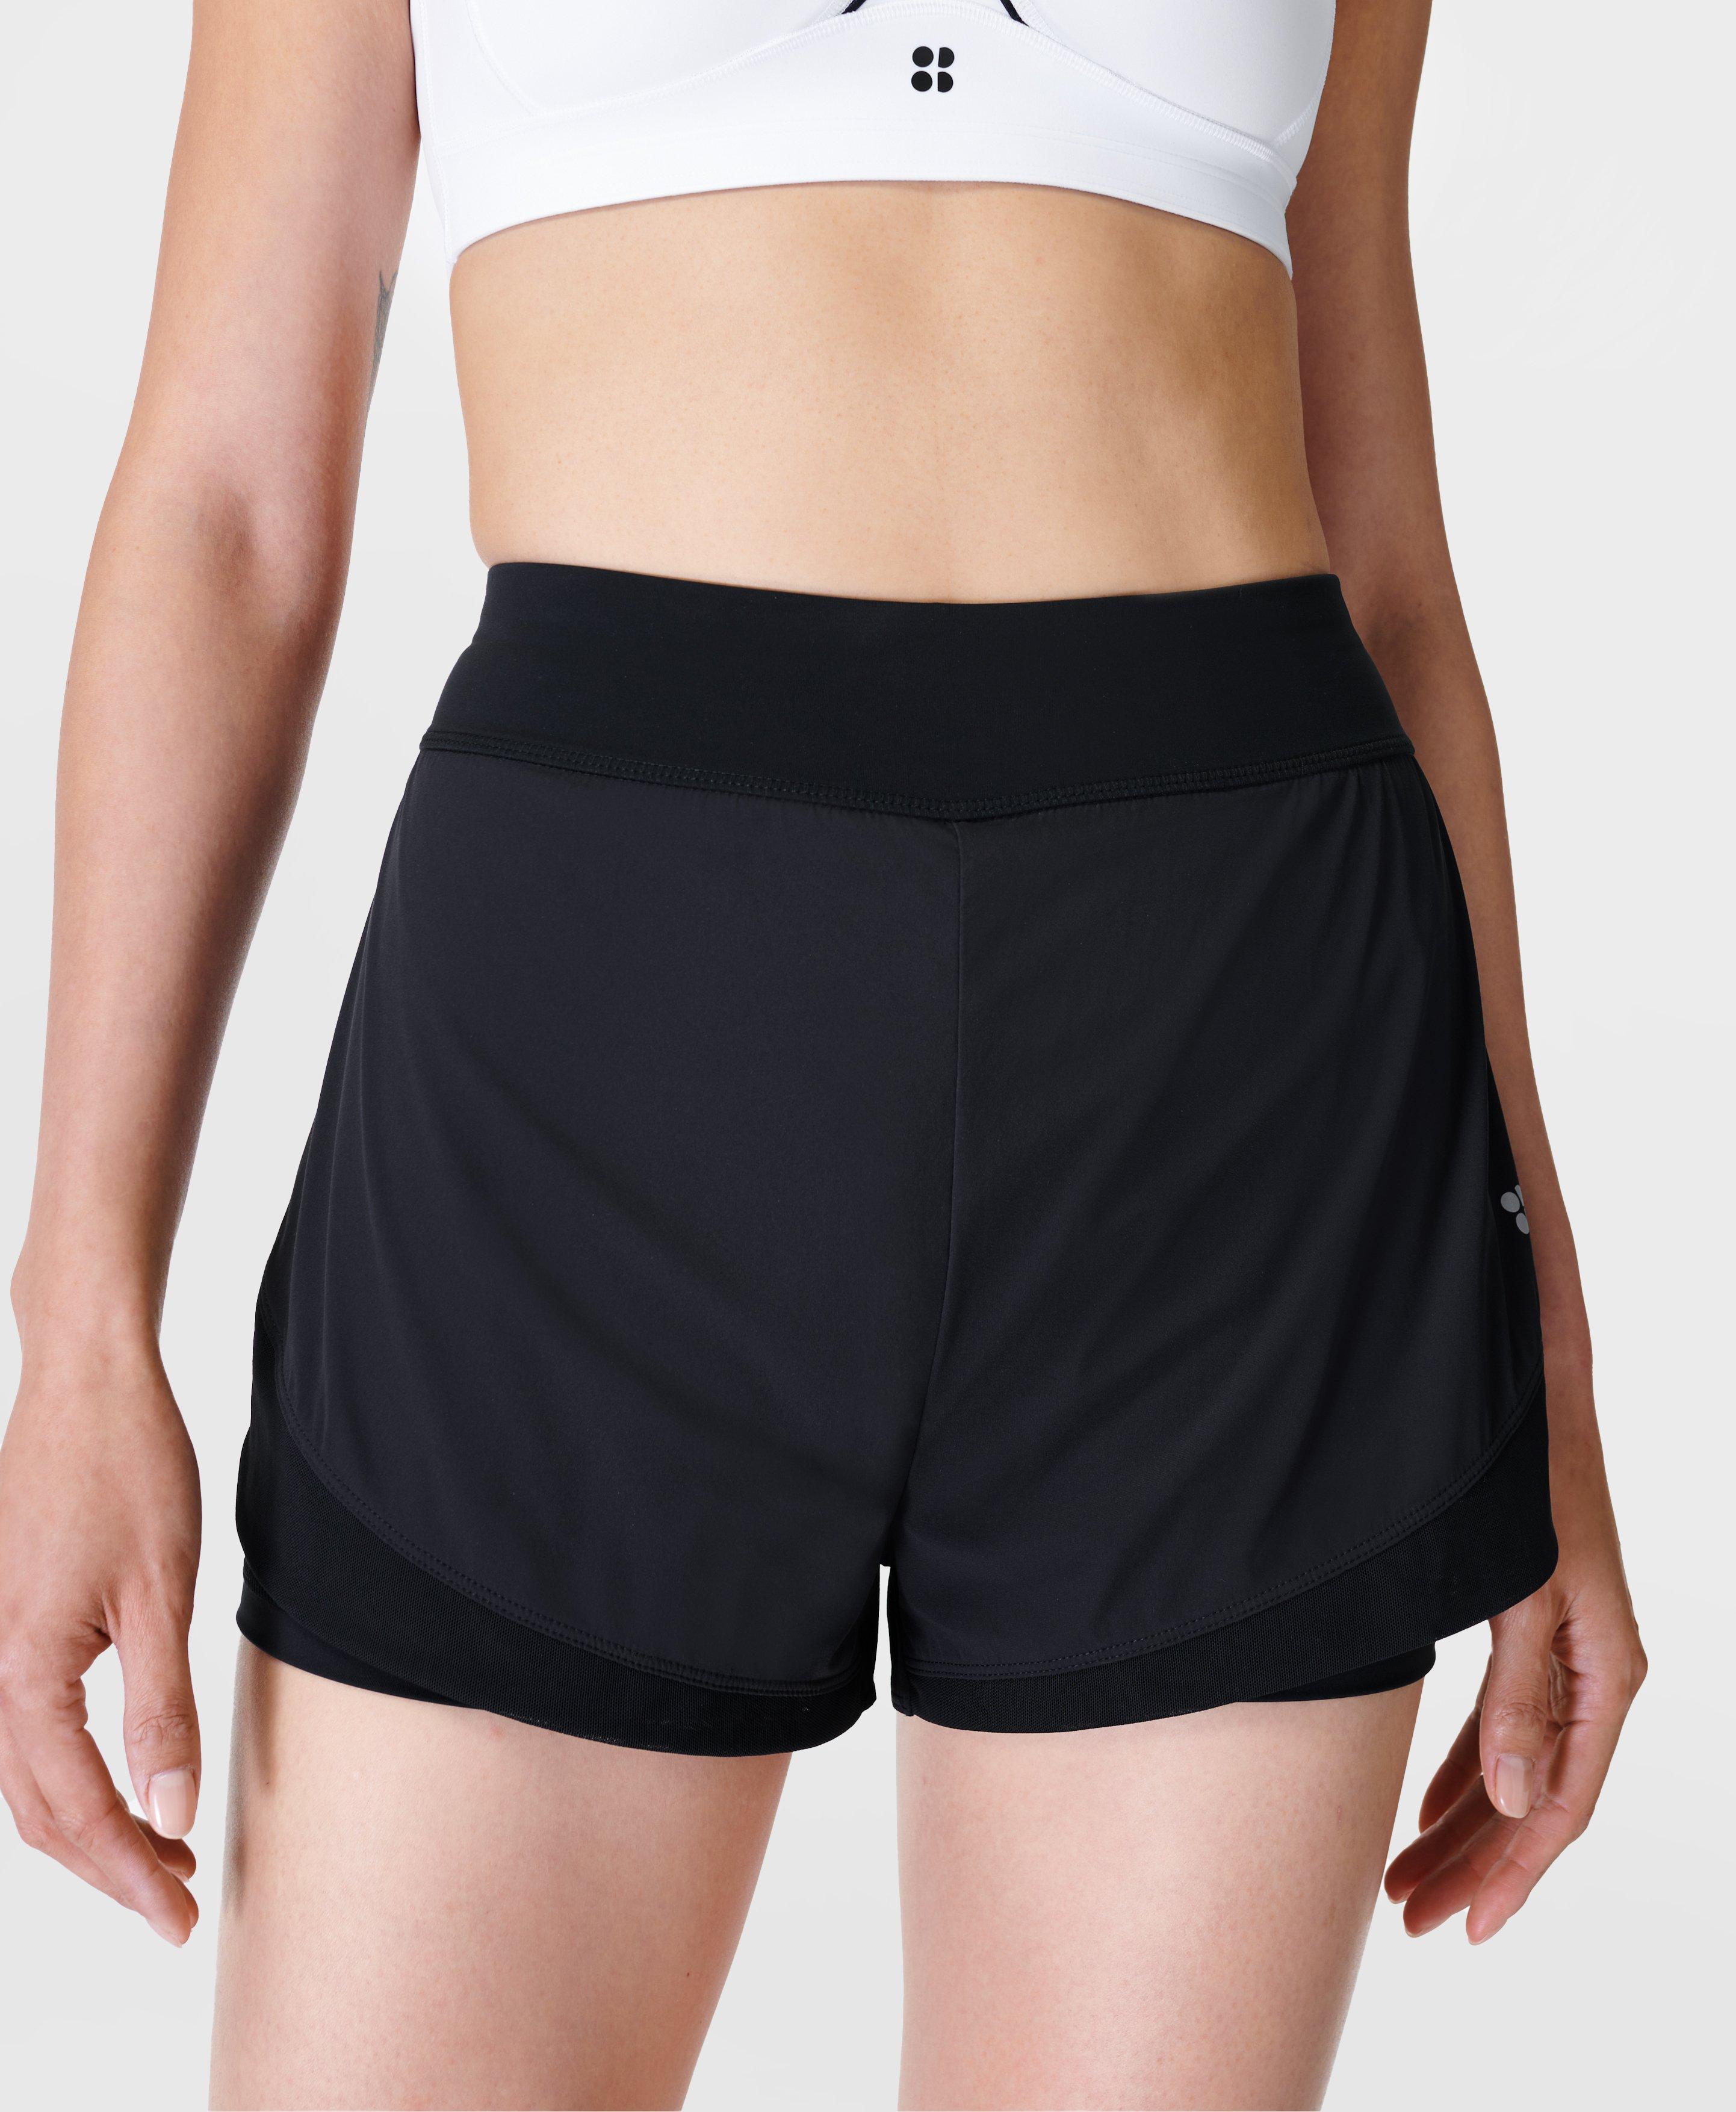 women wholesale athletic shorts for Fitness, Functionality and Style 